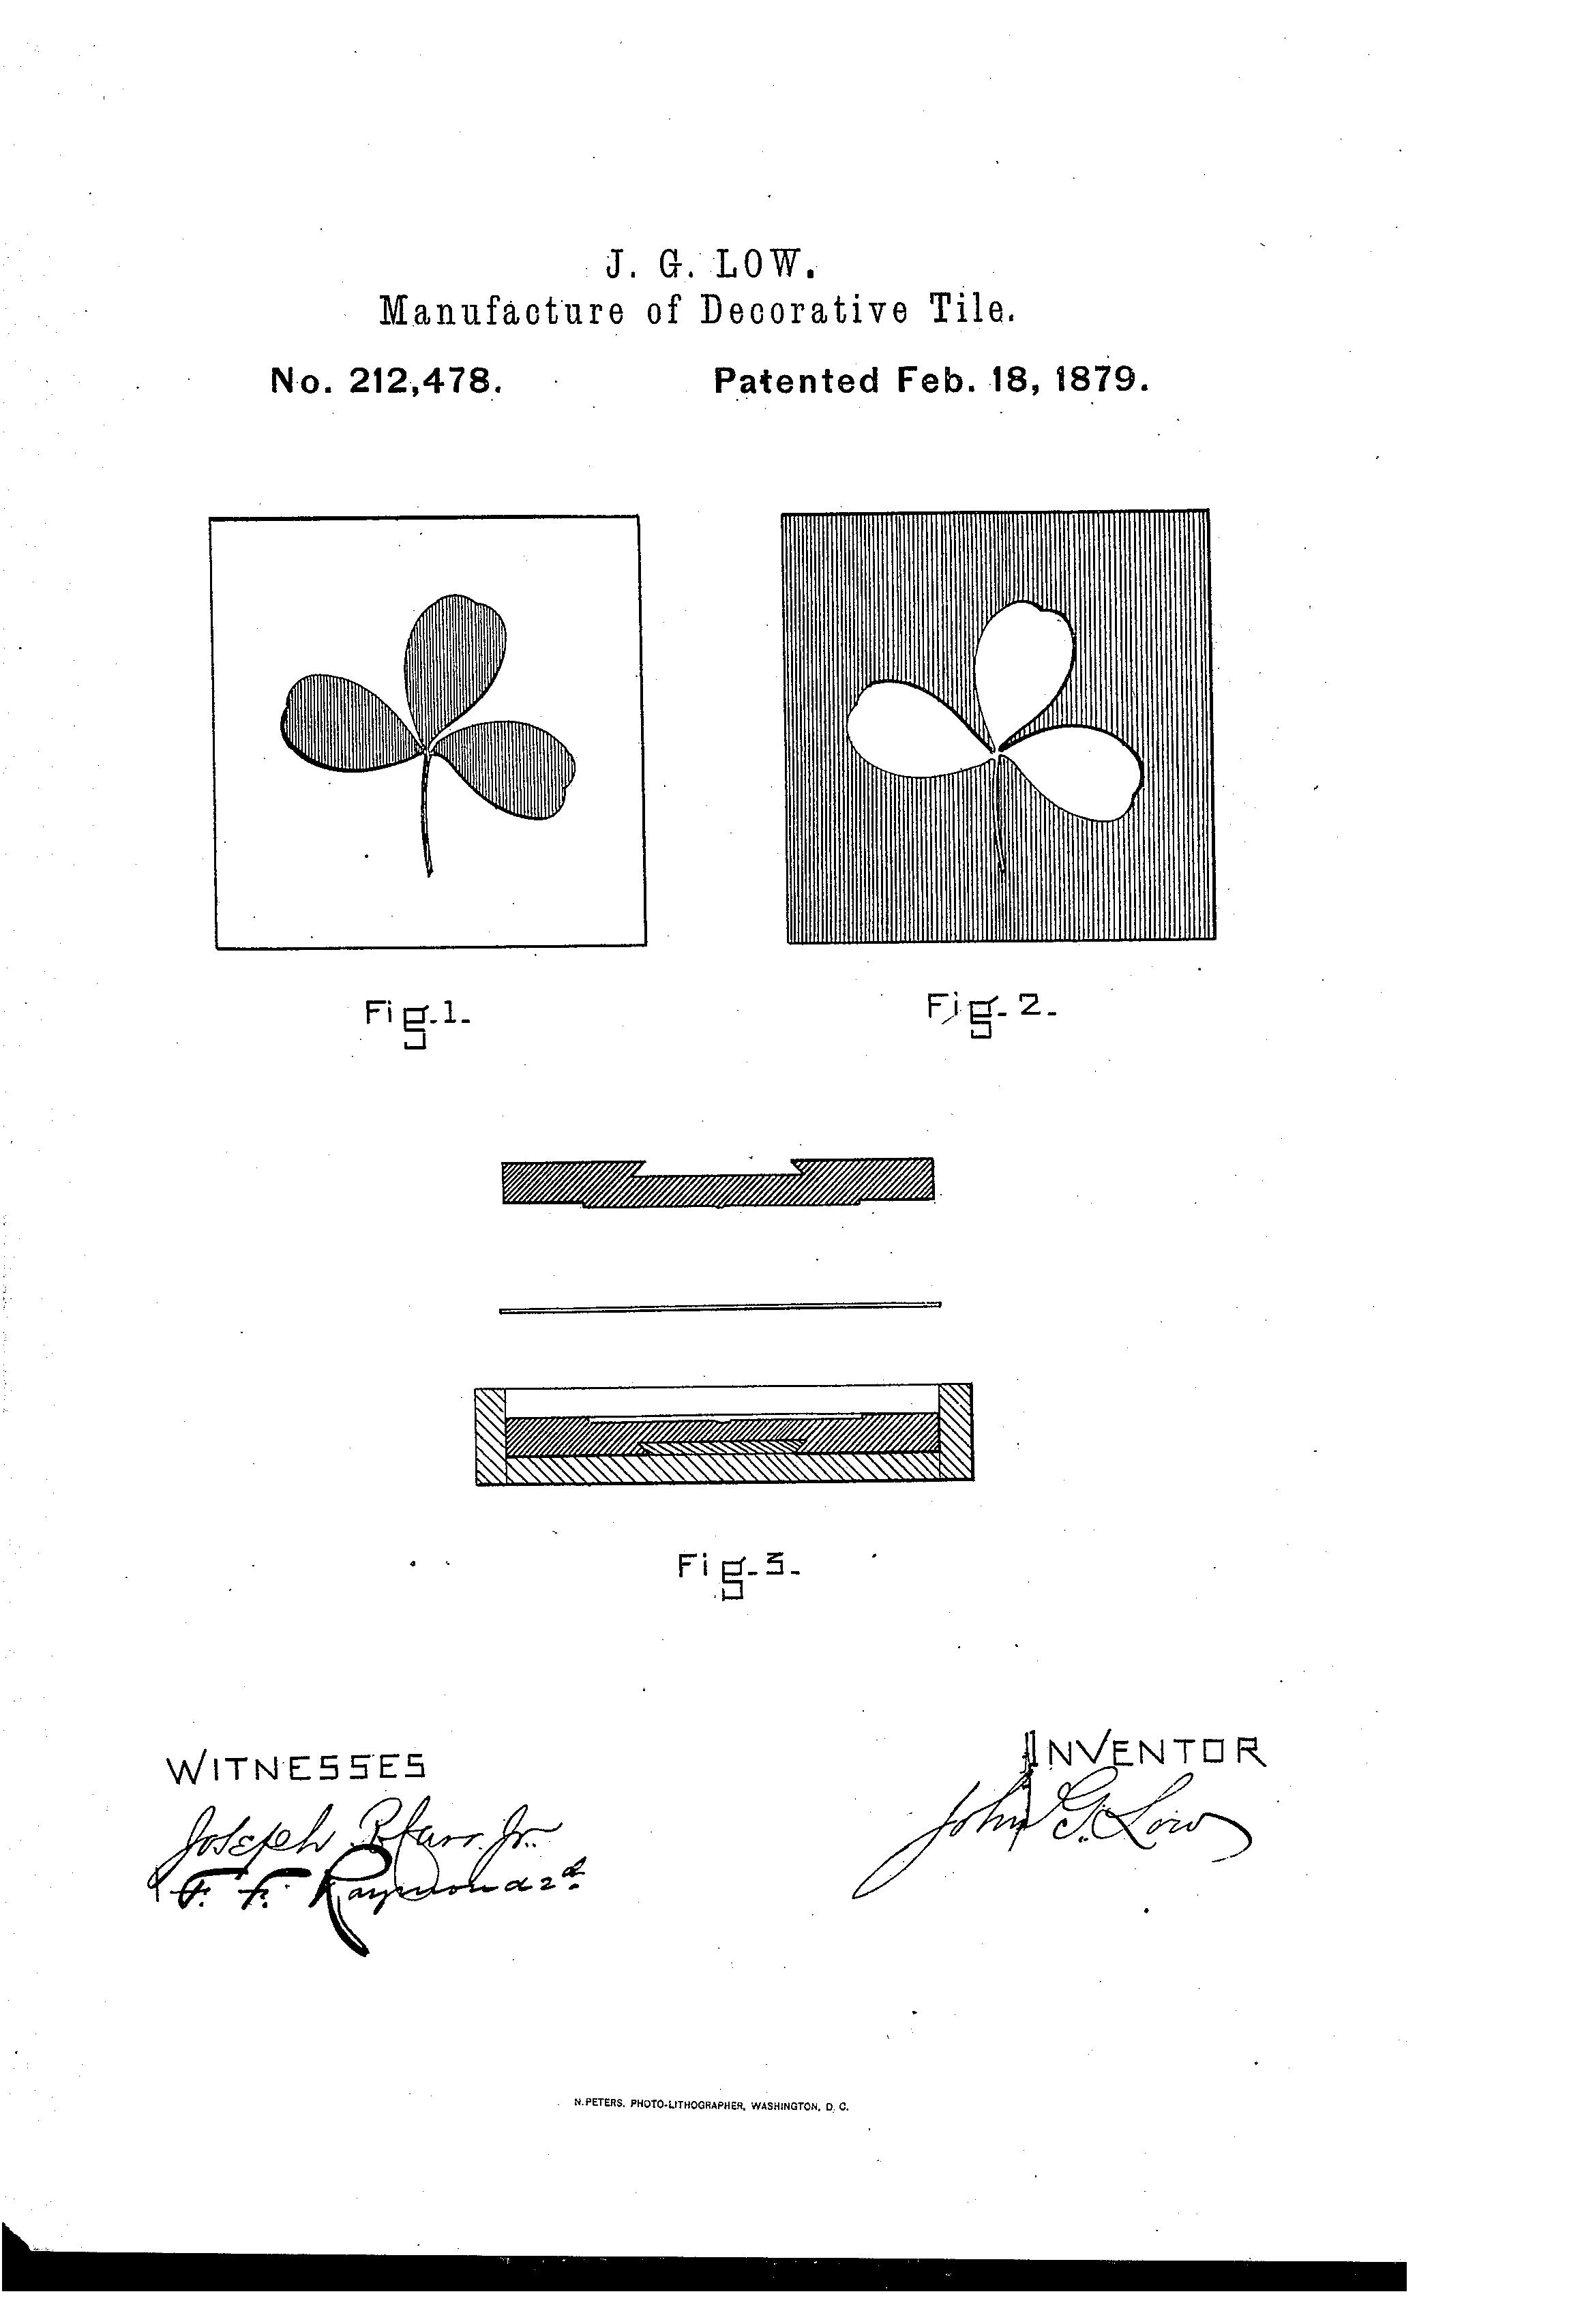 Patent with black and white drawings of white square with black clover labeled Fig. 1 and black square with white clover labeled Fig. 2. Text reads: J.G. Low Manufacturer of Decorative Tile, No. 212478, Patented Feb 18, 1879.